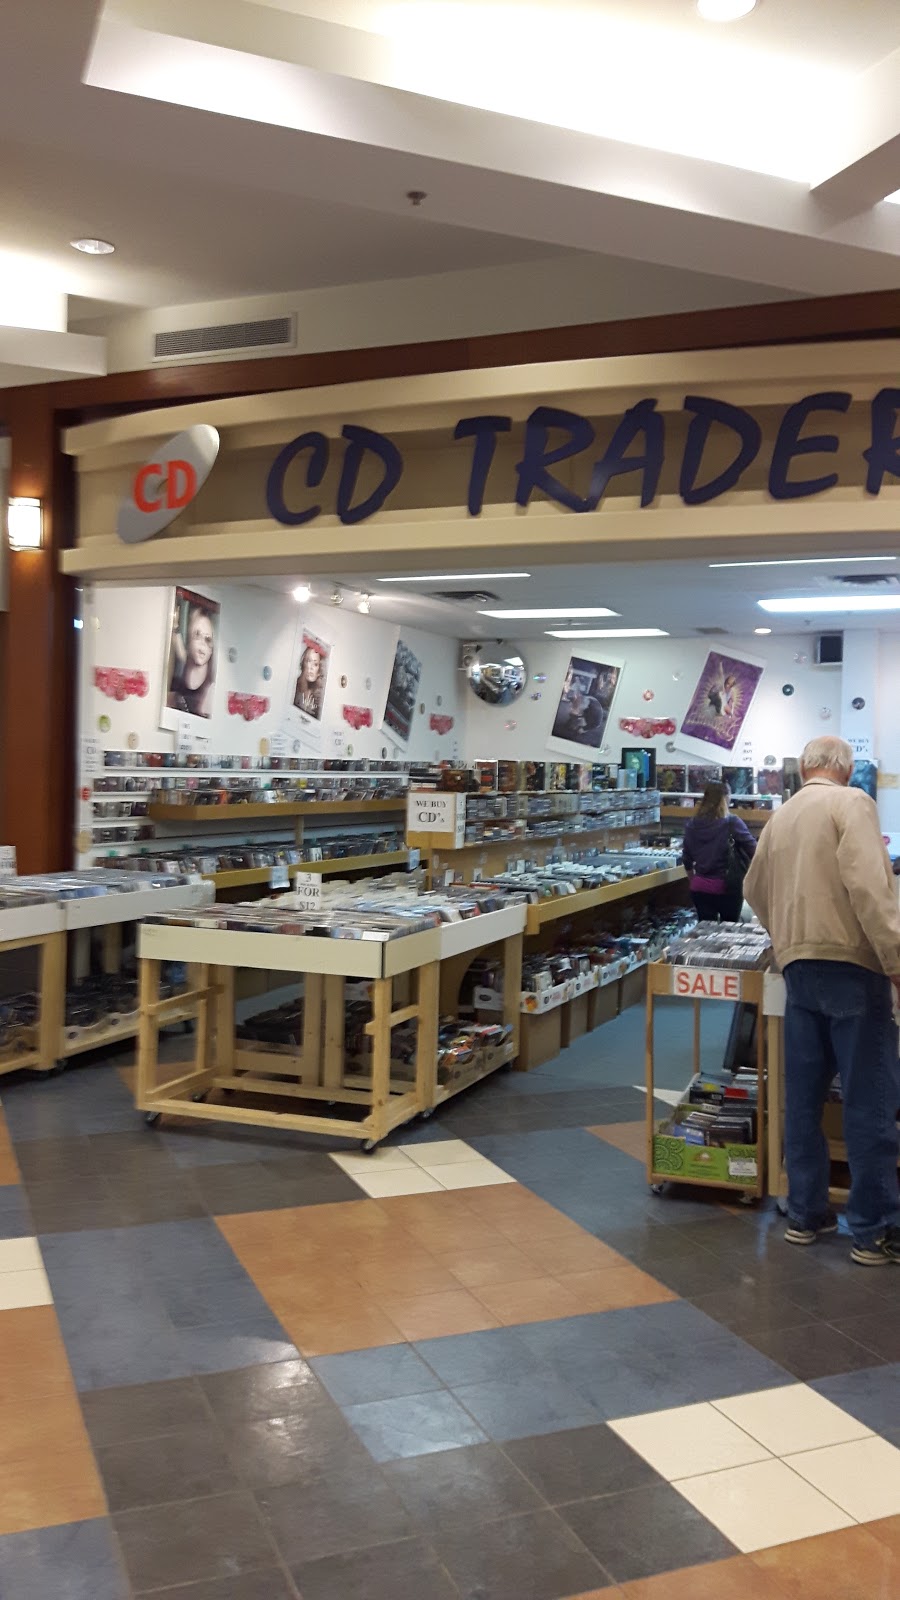 C D Trader Ltd | 3630 Brentwood Rd NW, Calgary, AB T2L 1K8, Canada | Phone: (403) 220-9470